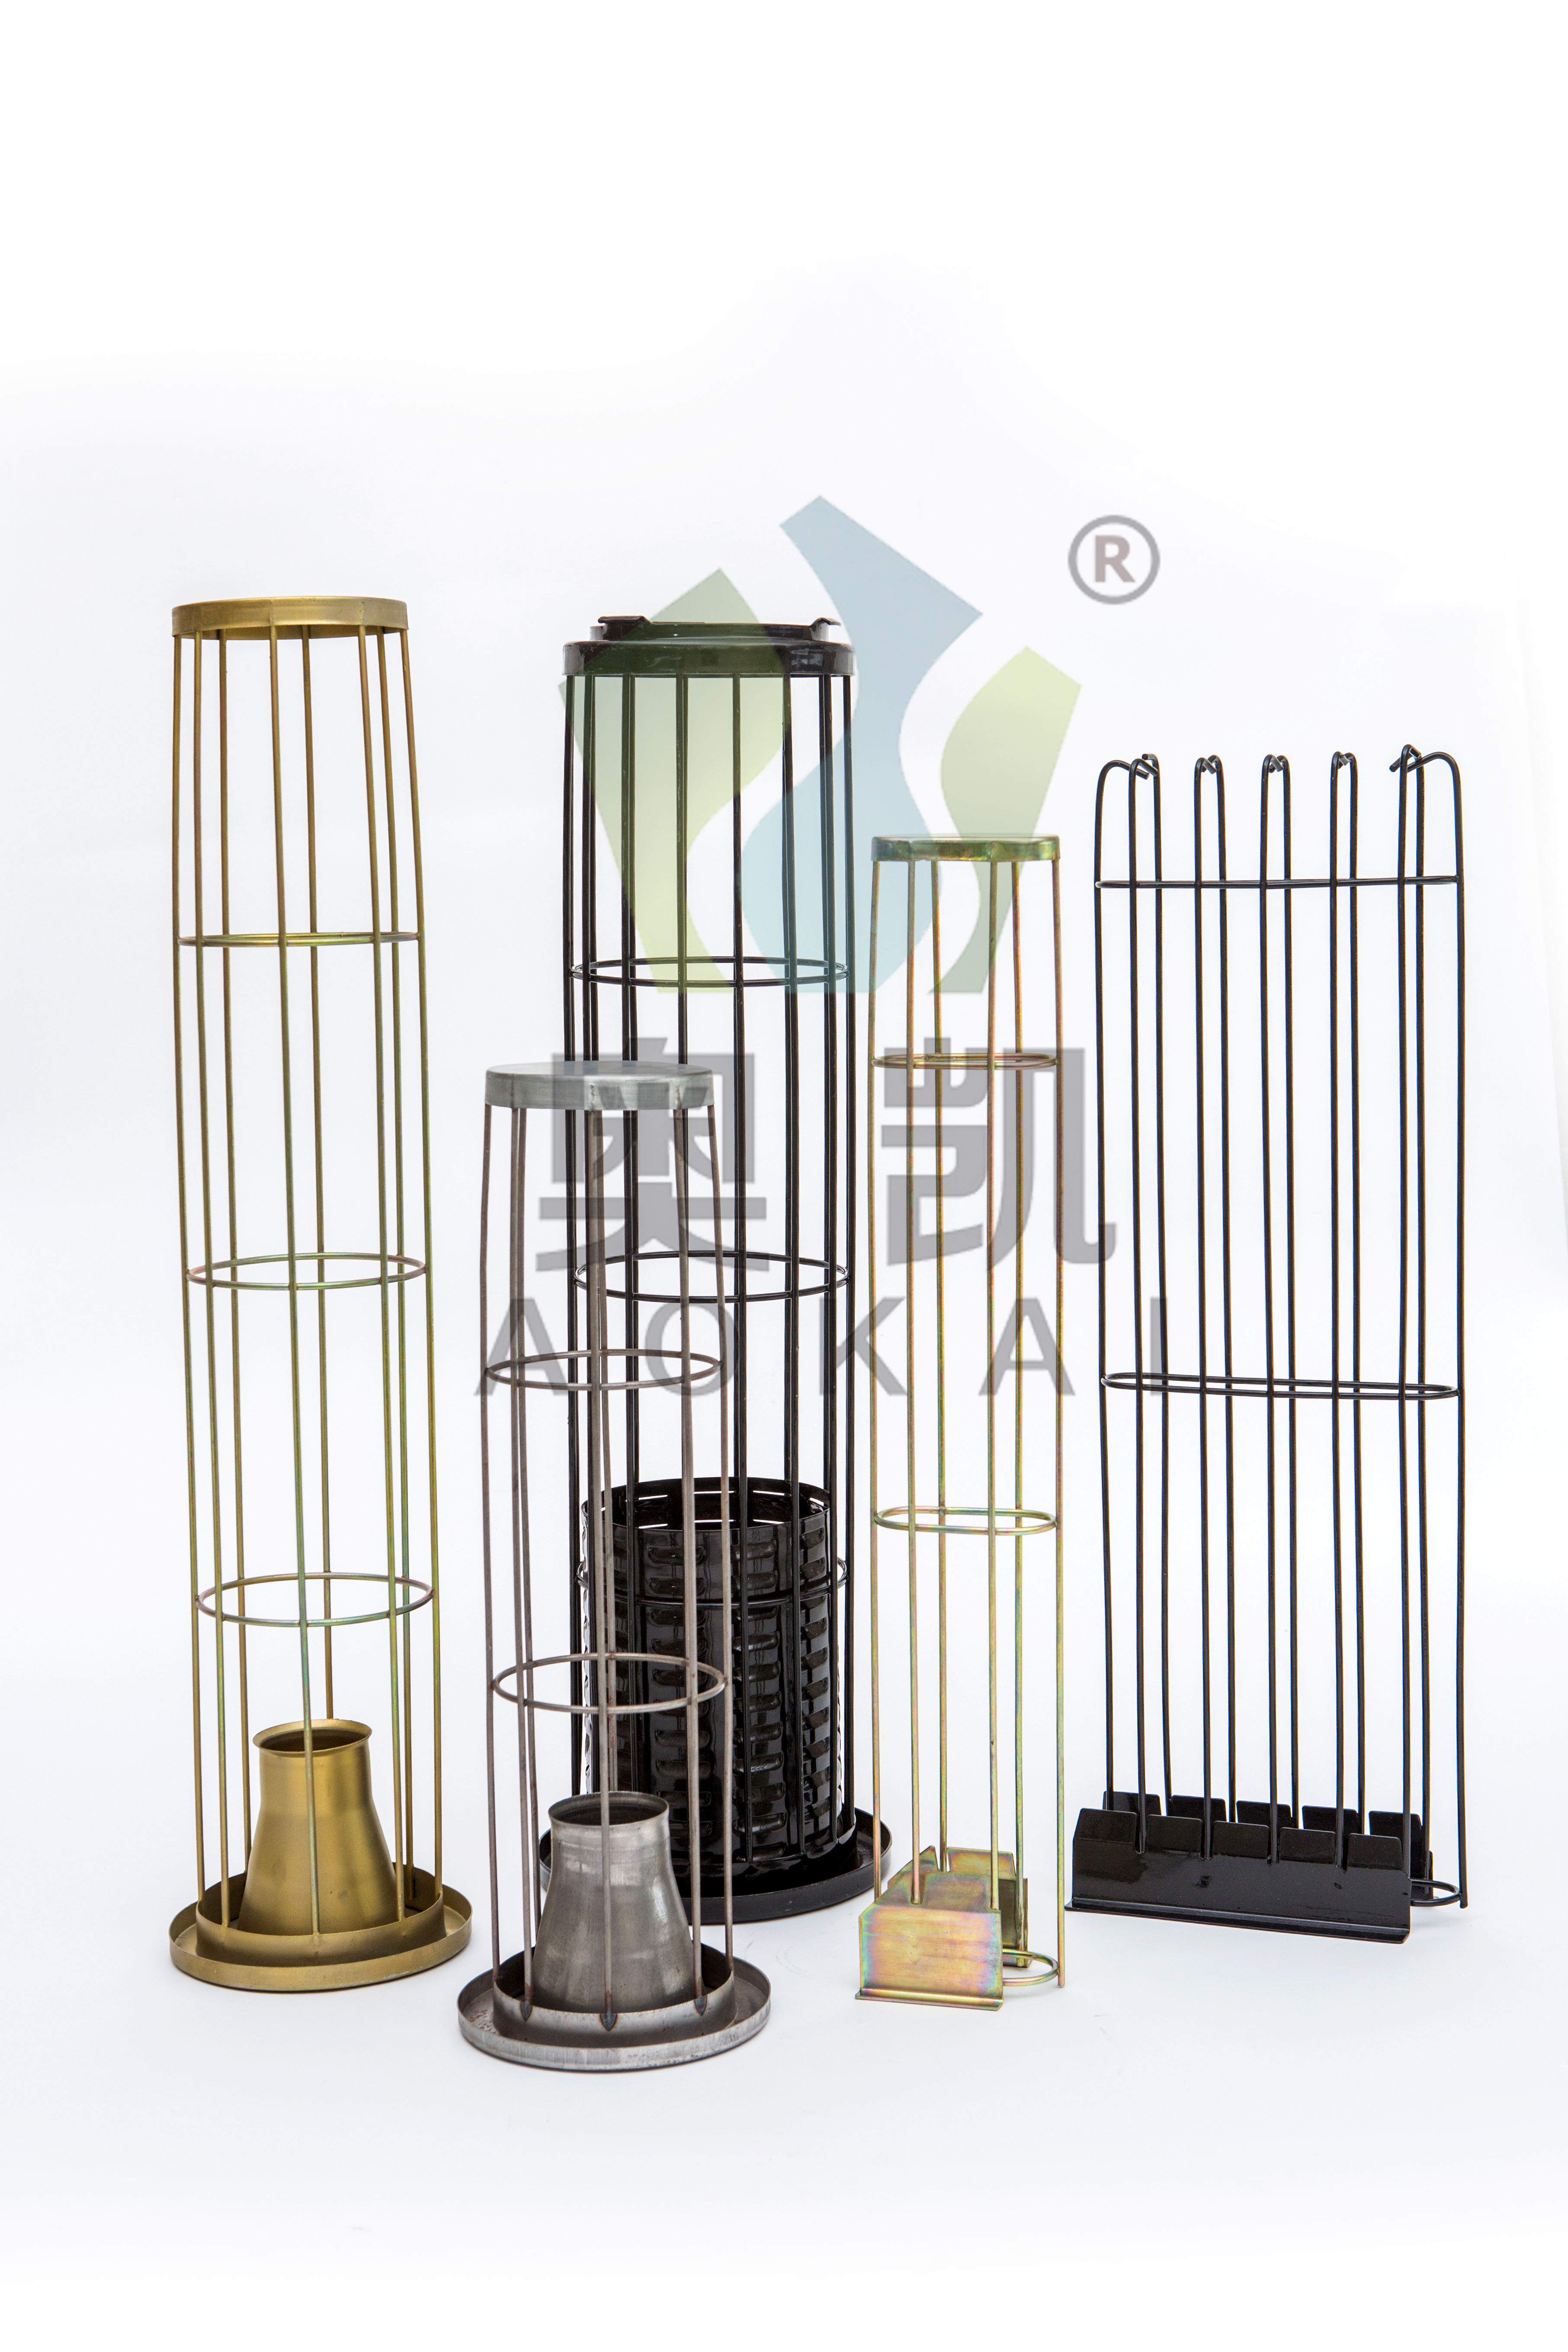 The after treatment of dust filter bag cages 